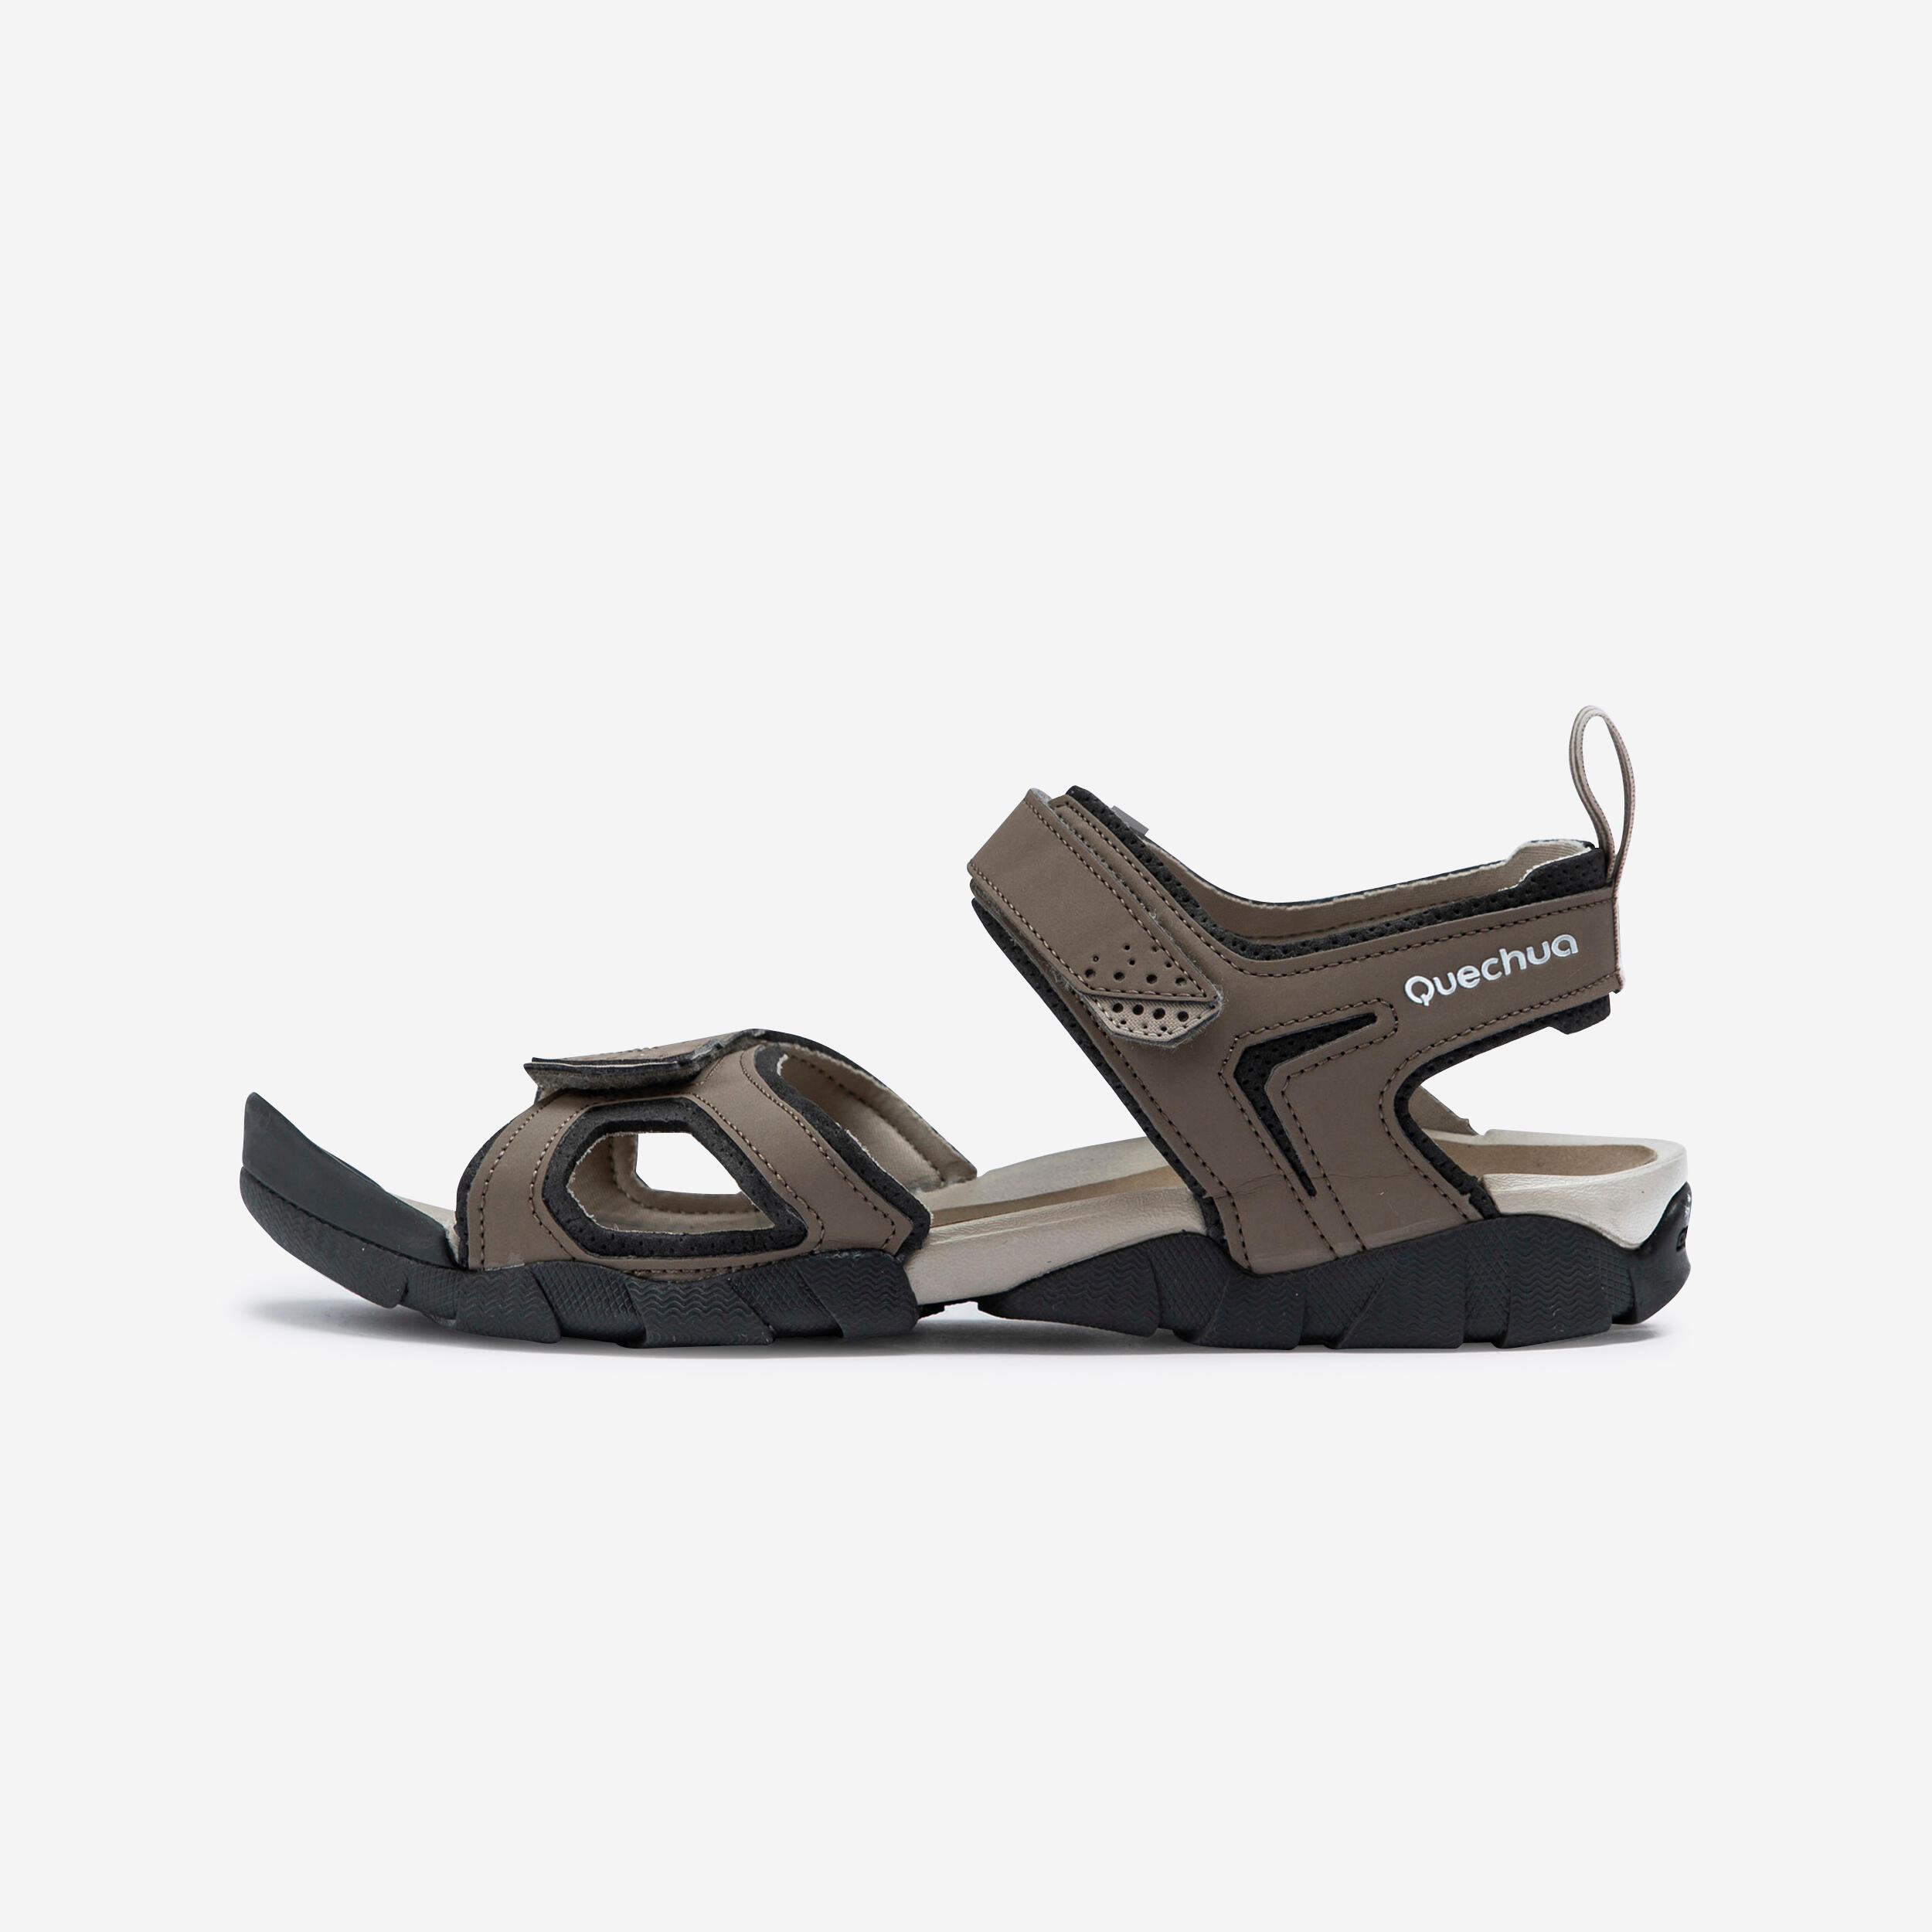 Marnish - Brown Men's Sandals - Buy Marnish - Brown Men's Sandals Online at  Best Prices in India on Snapdeal